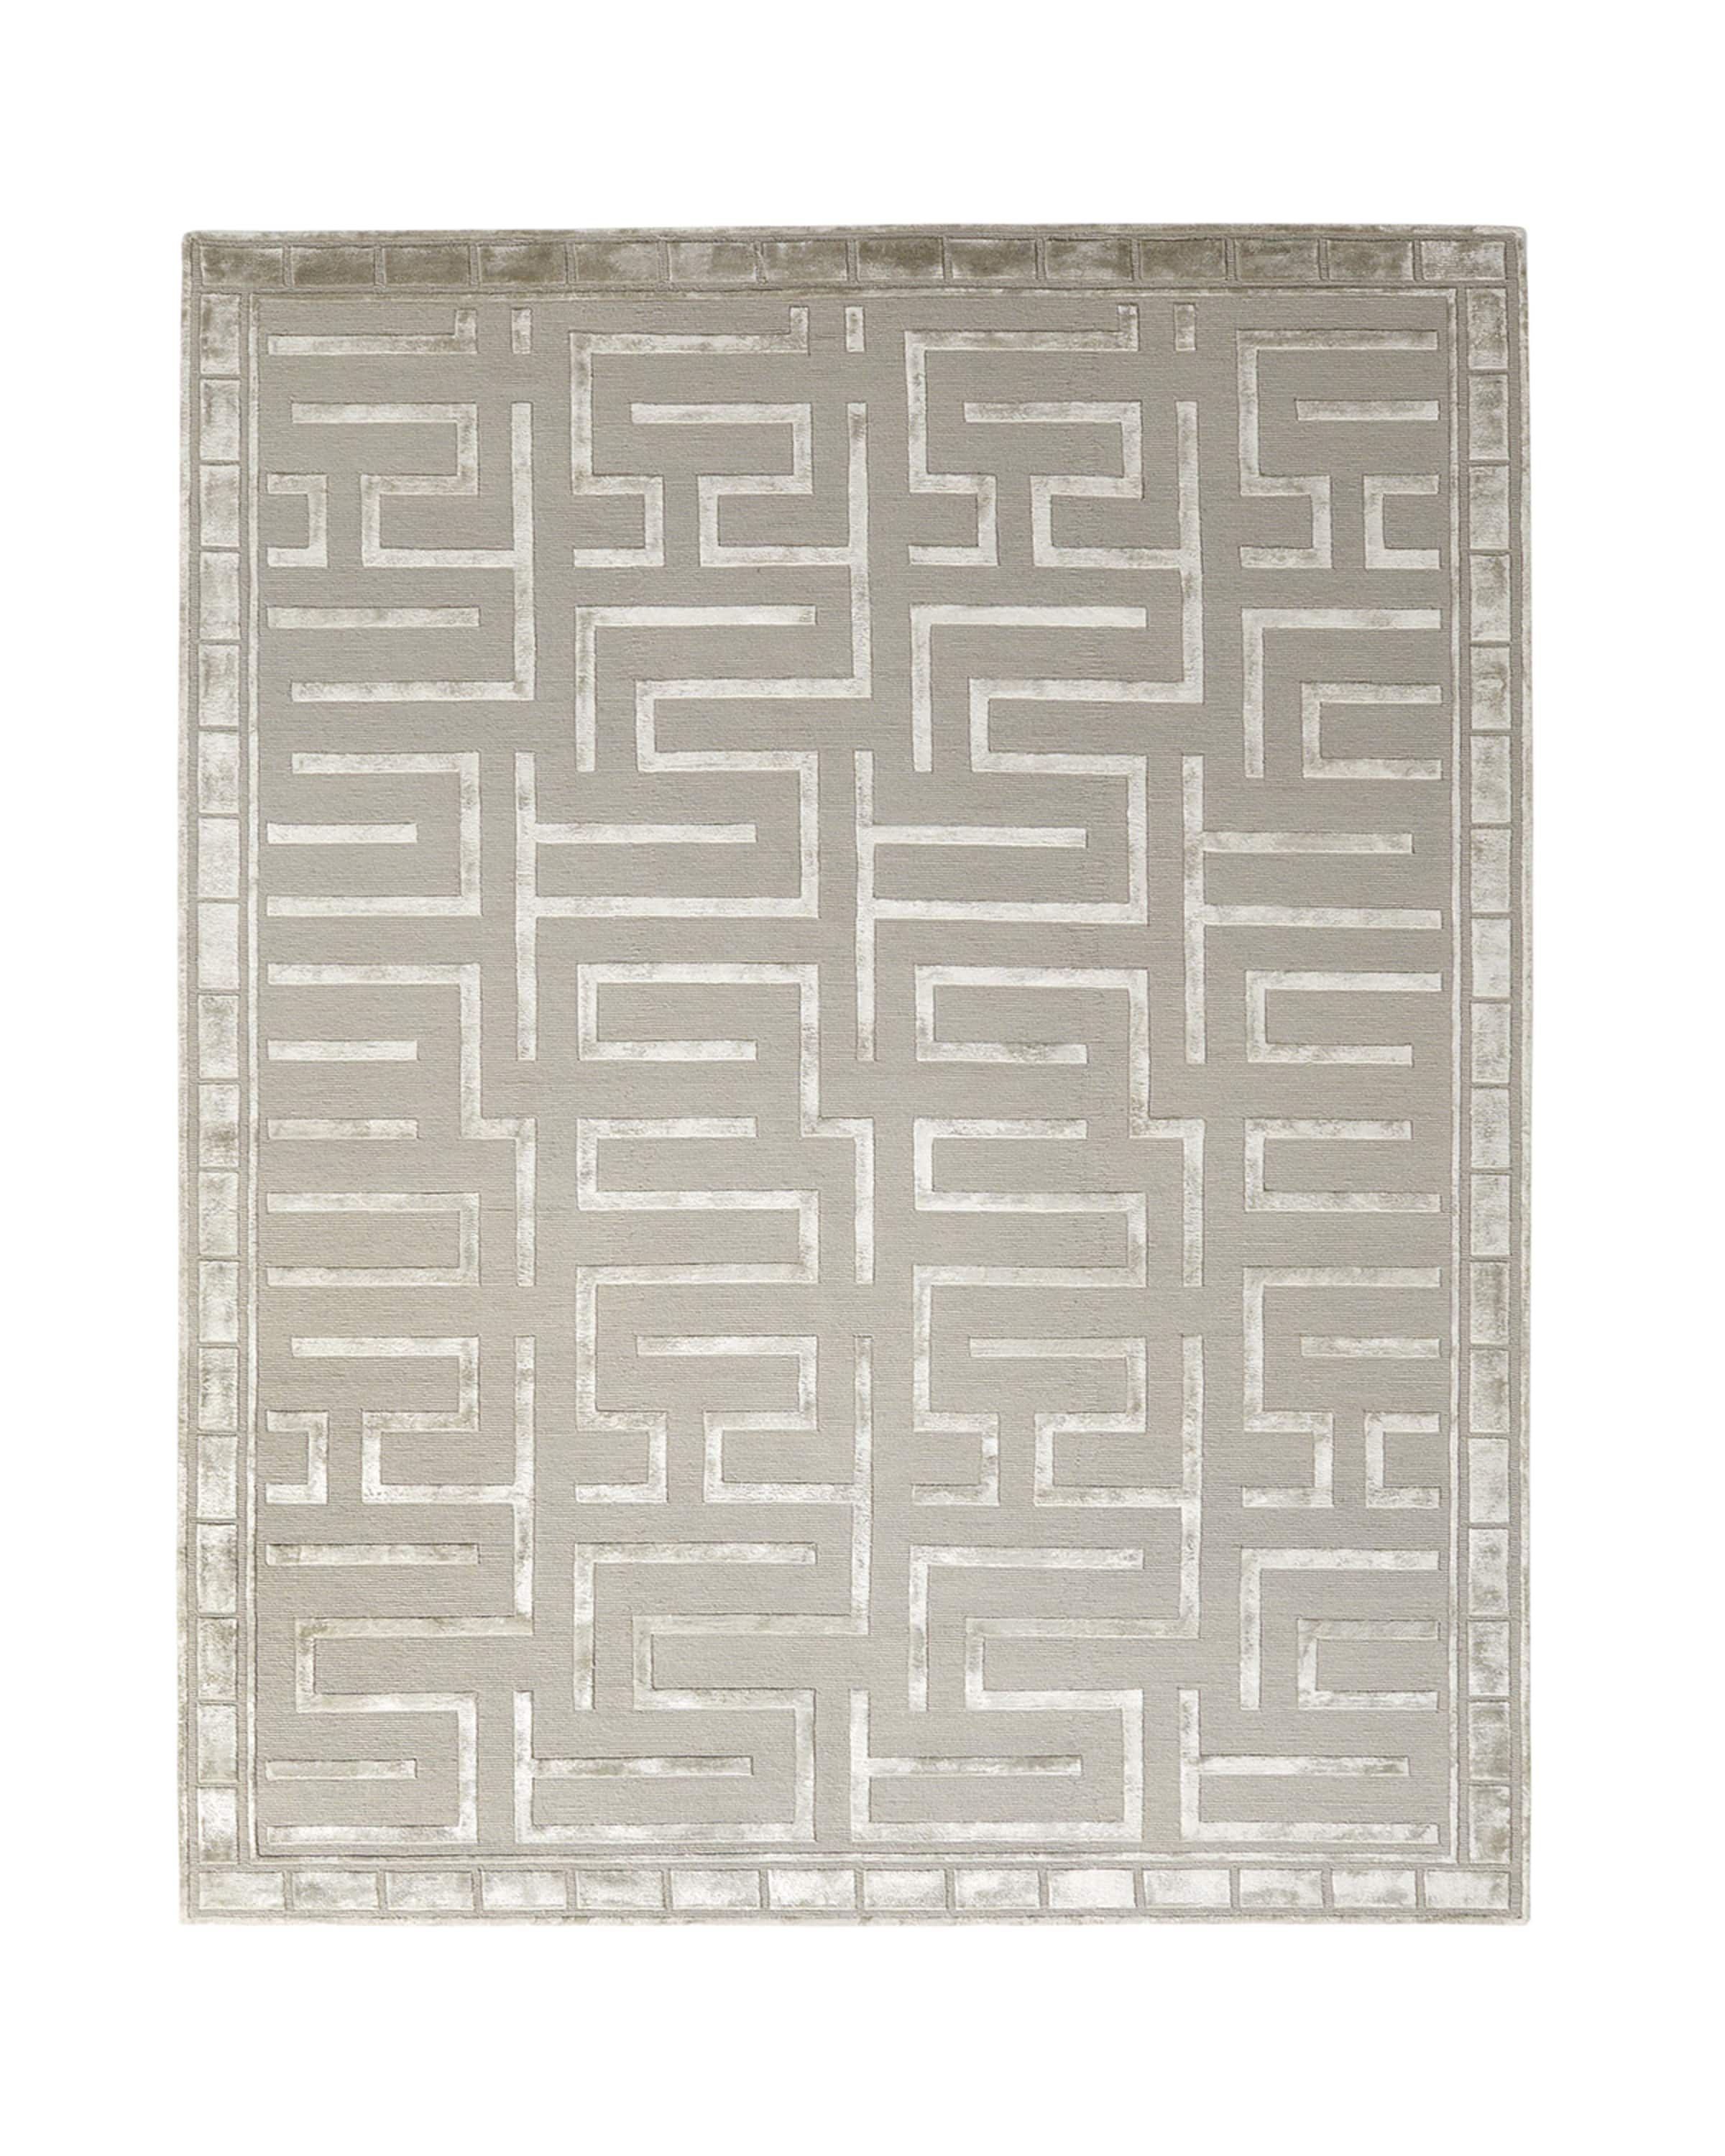 Exquisite Rugs Rowling Maze Hand-Knotted Rug, 8' x 10'